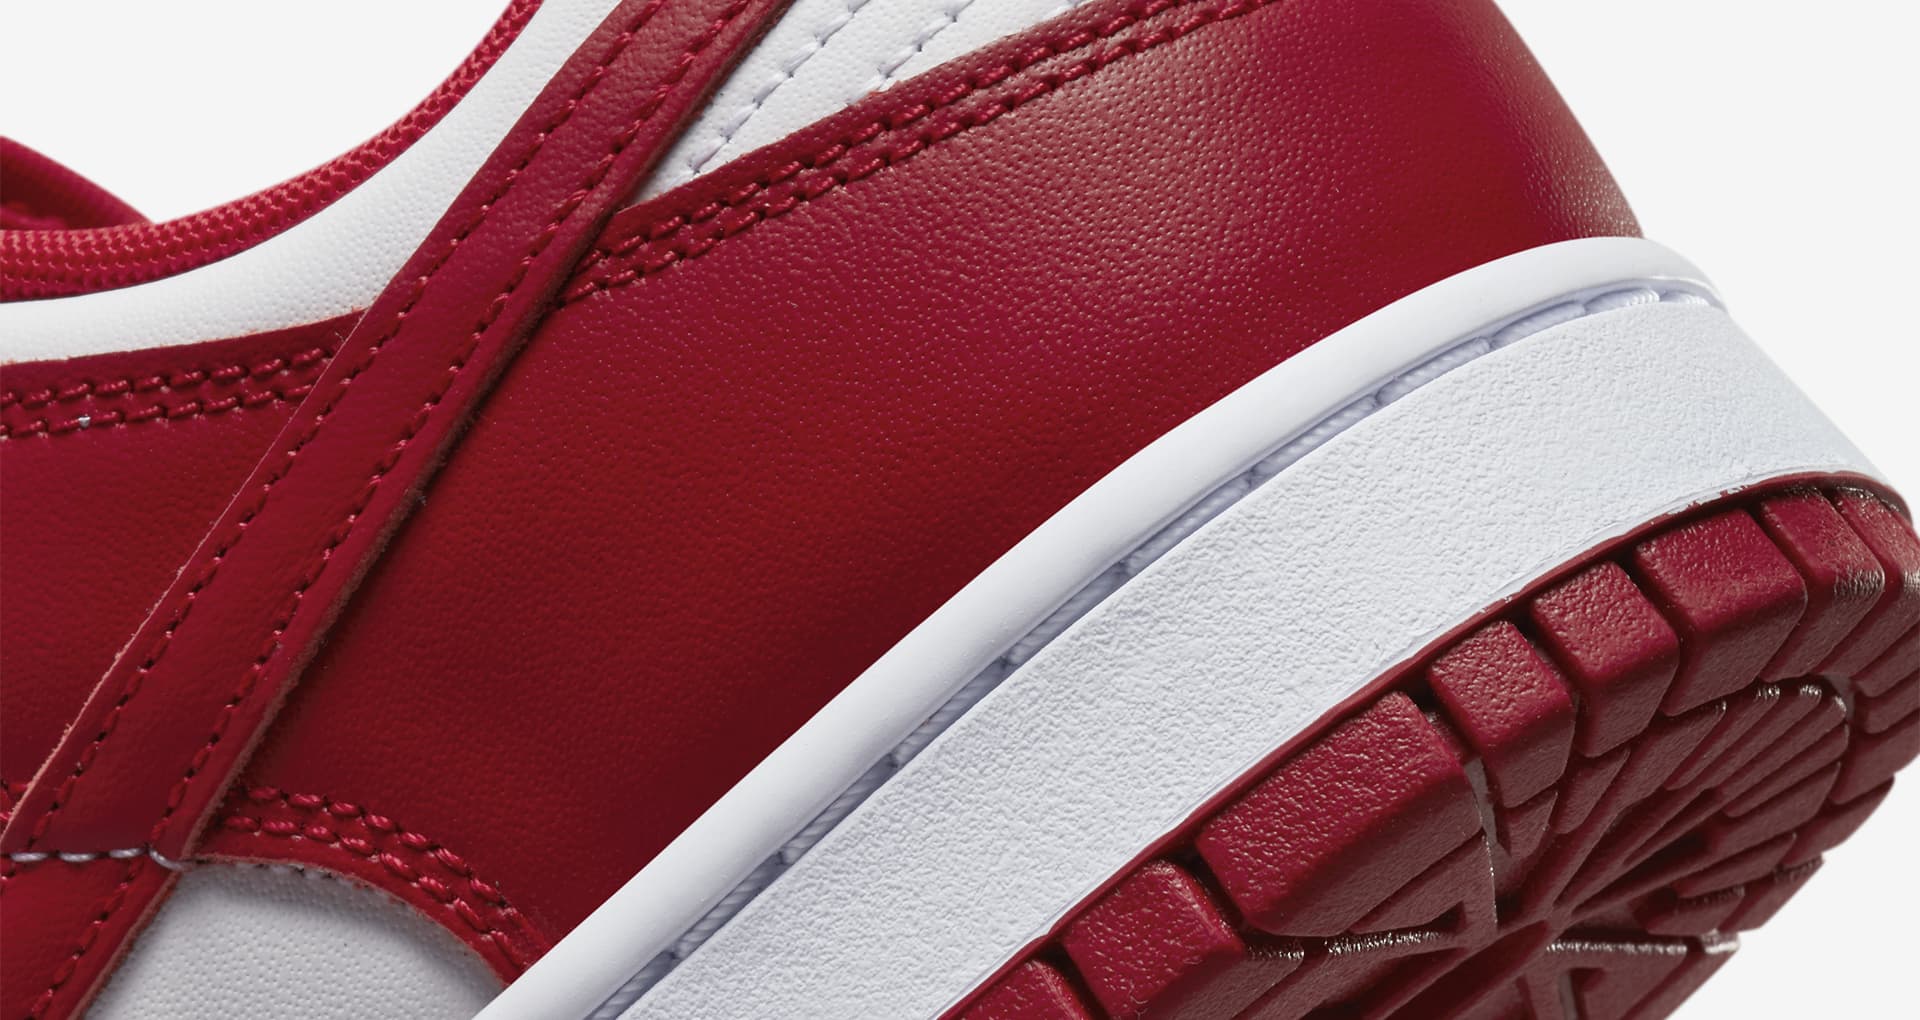 Dunk Low Retro 'Gym Red' (DD1391-602) Release Date. Nike SNKRS SG